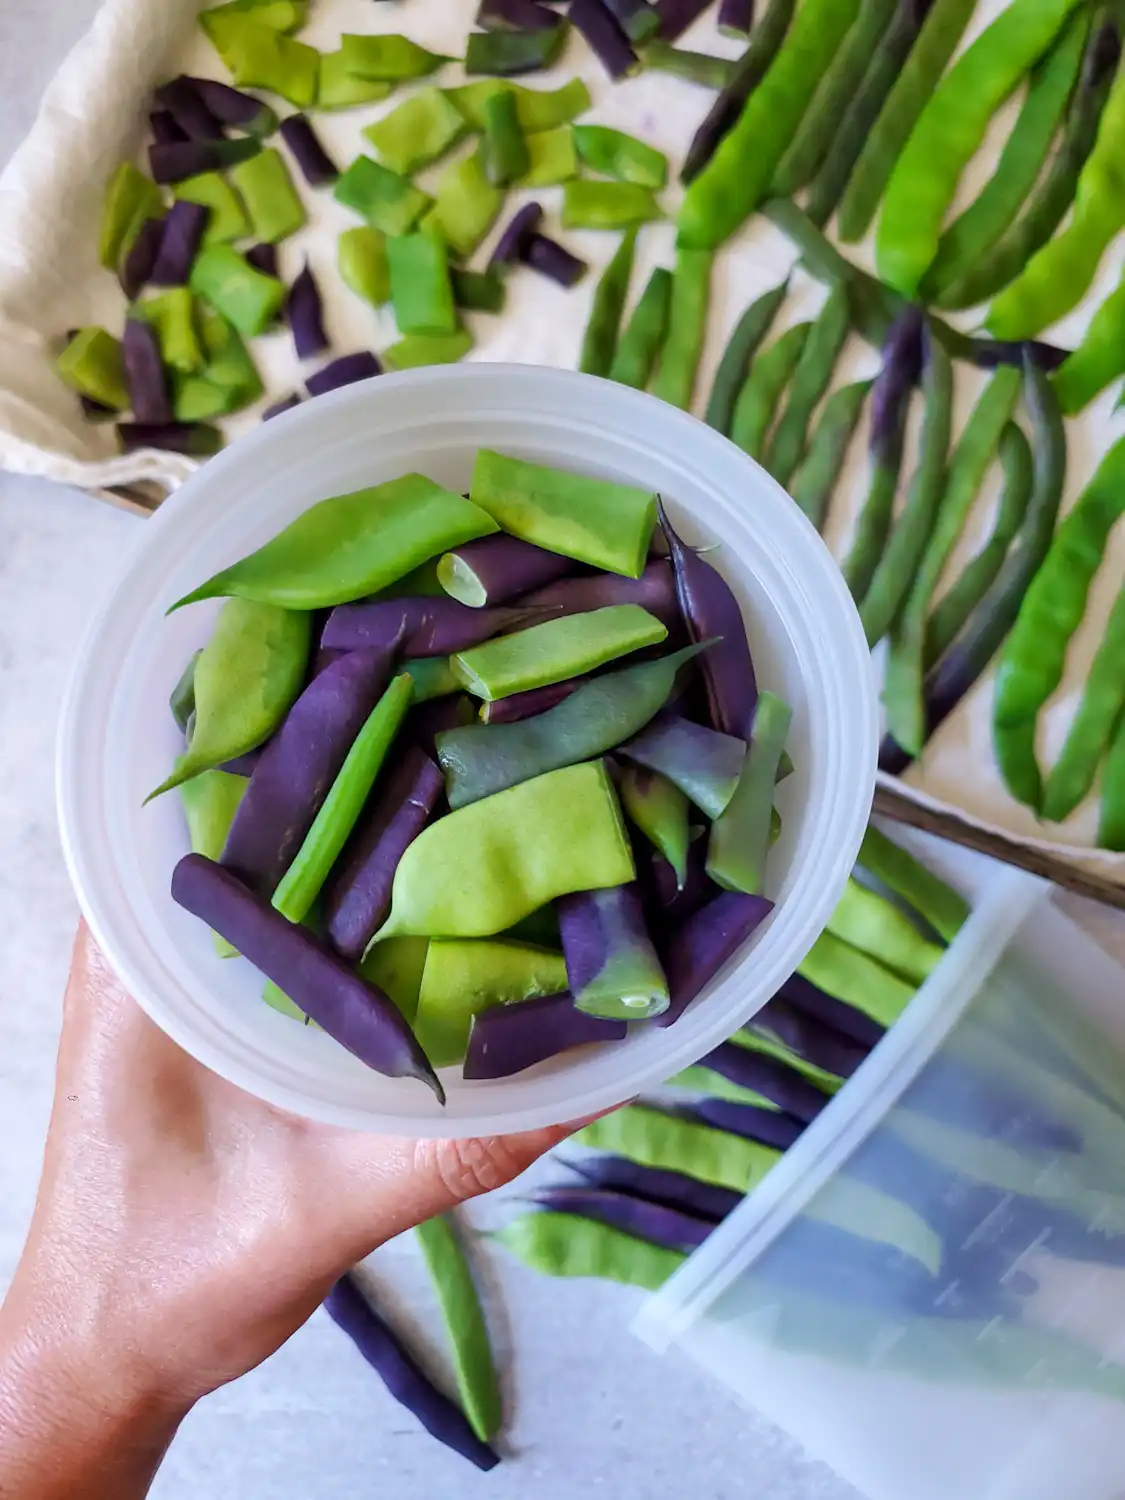 A hand is holding a freezer safe container full of green bean pieces. Beyond are a variety of whole and cut green beans air drying, getting ready to be packed and stored in the freezer. 